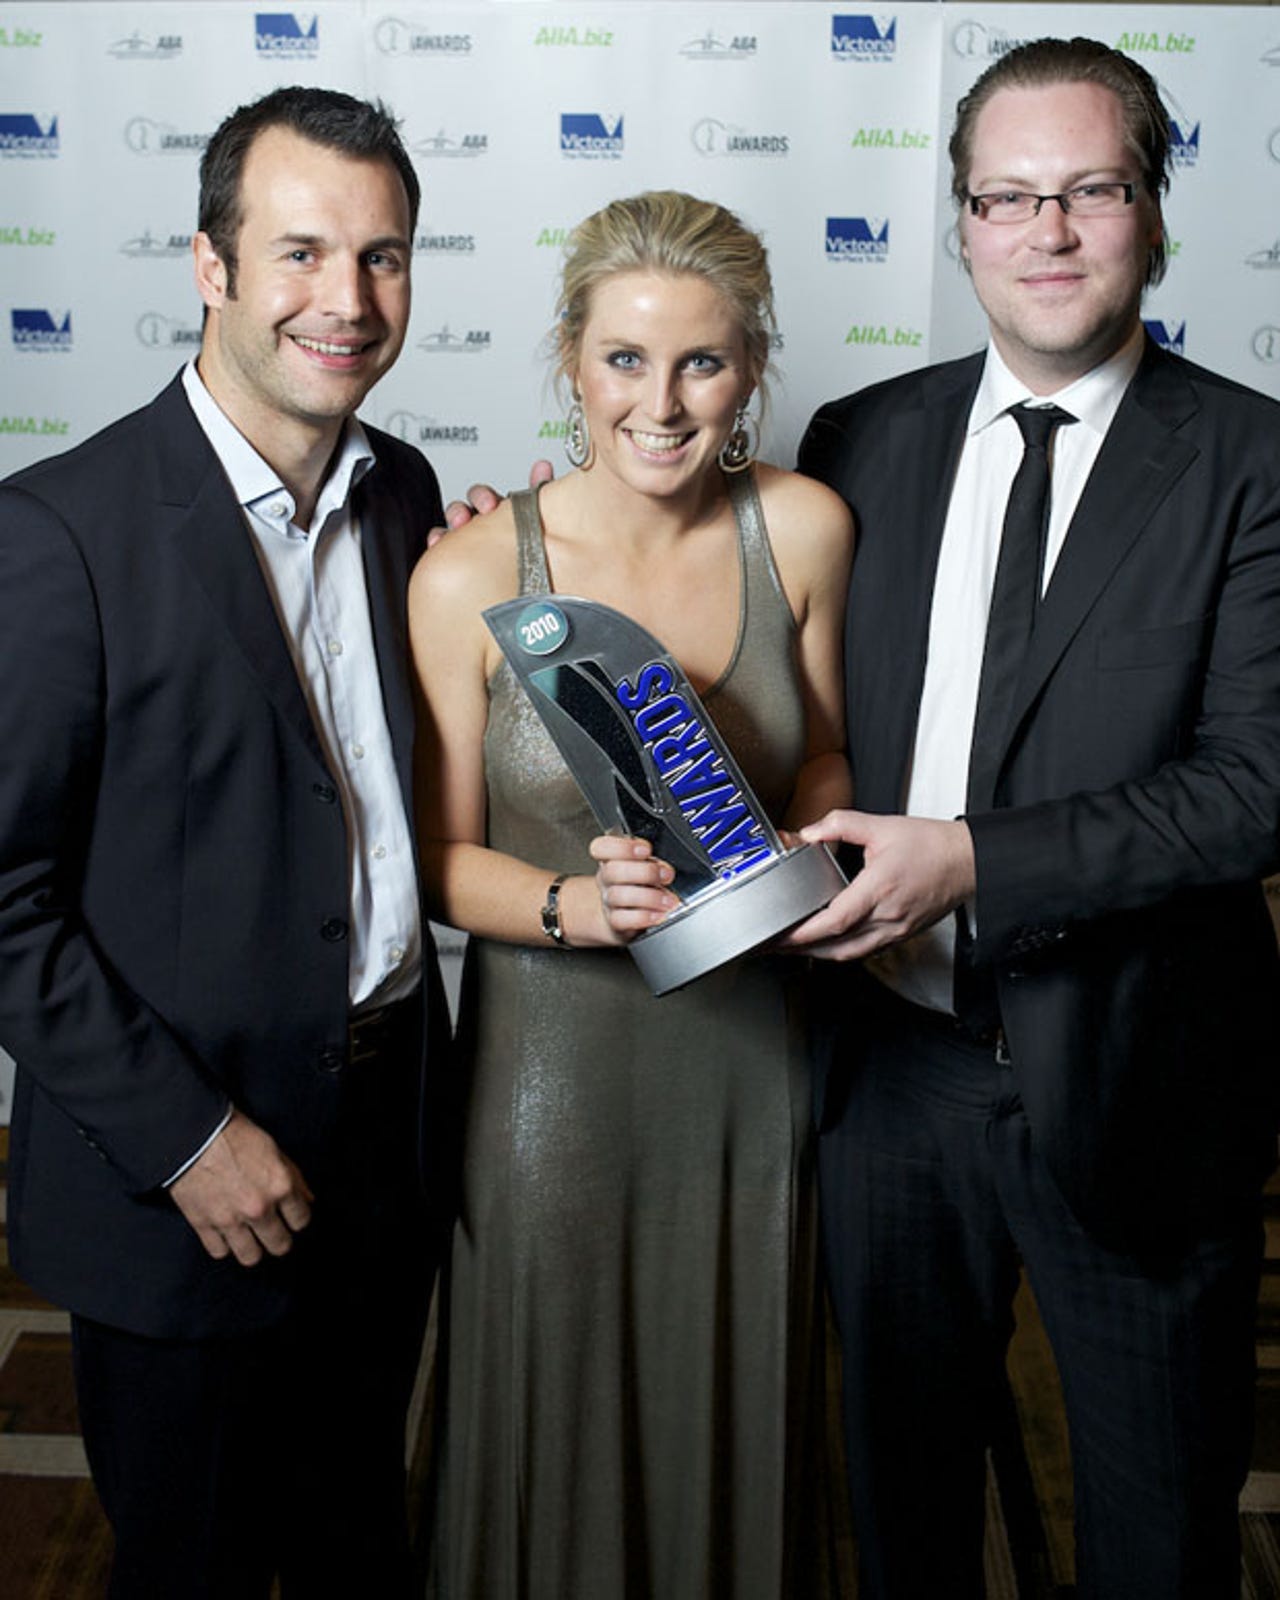 iawards-winners-are-grinners-photos15.jpg